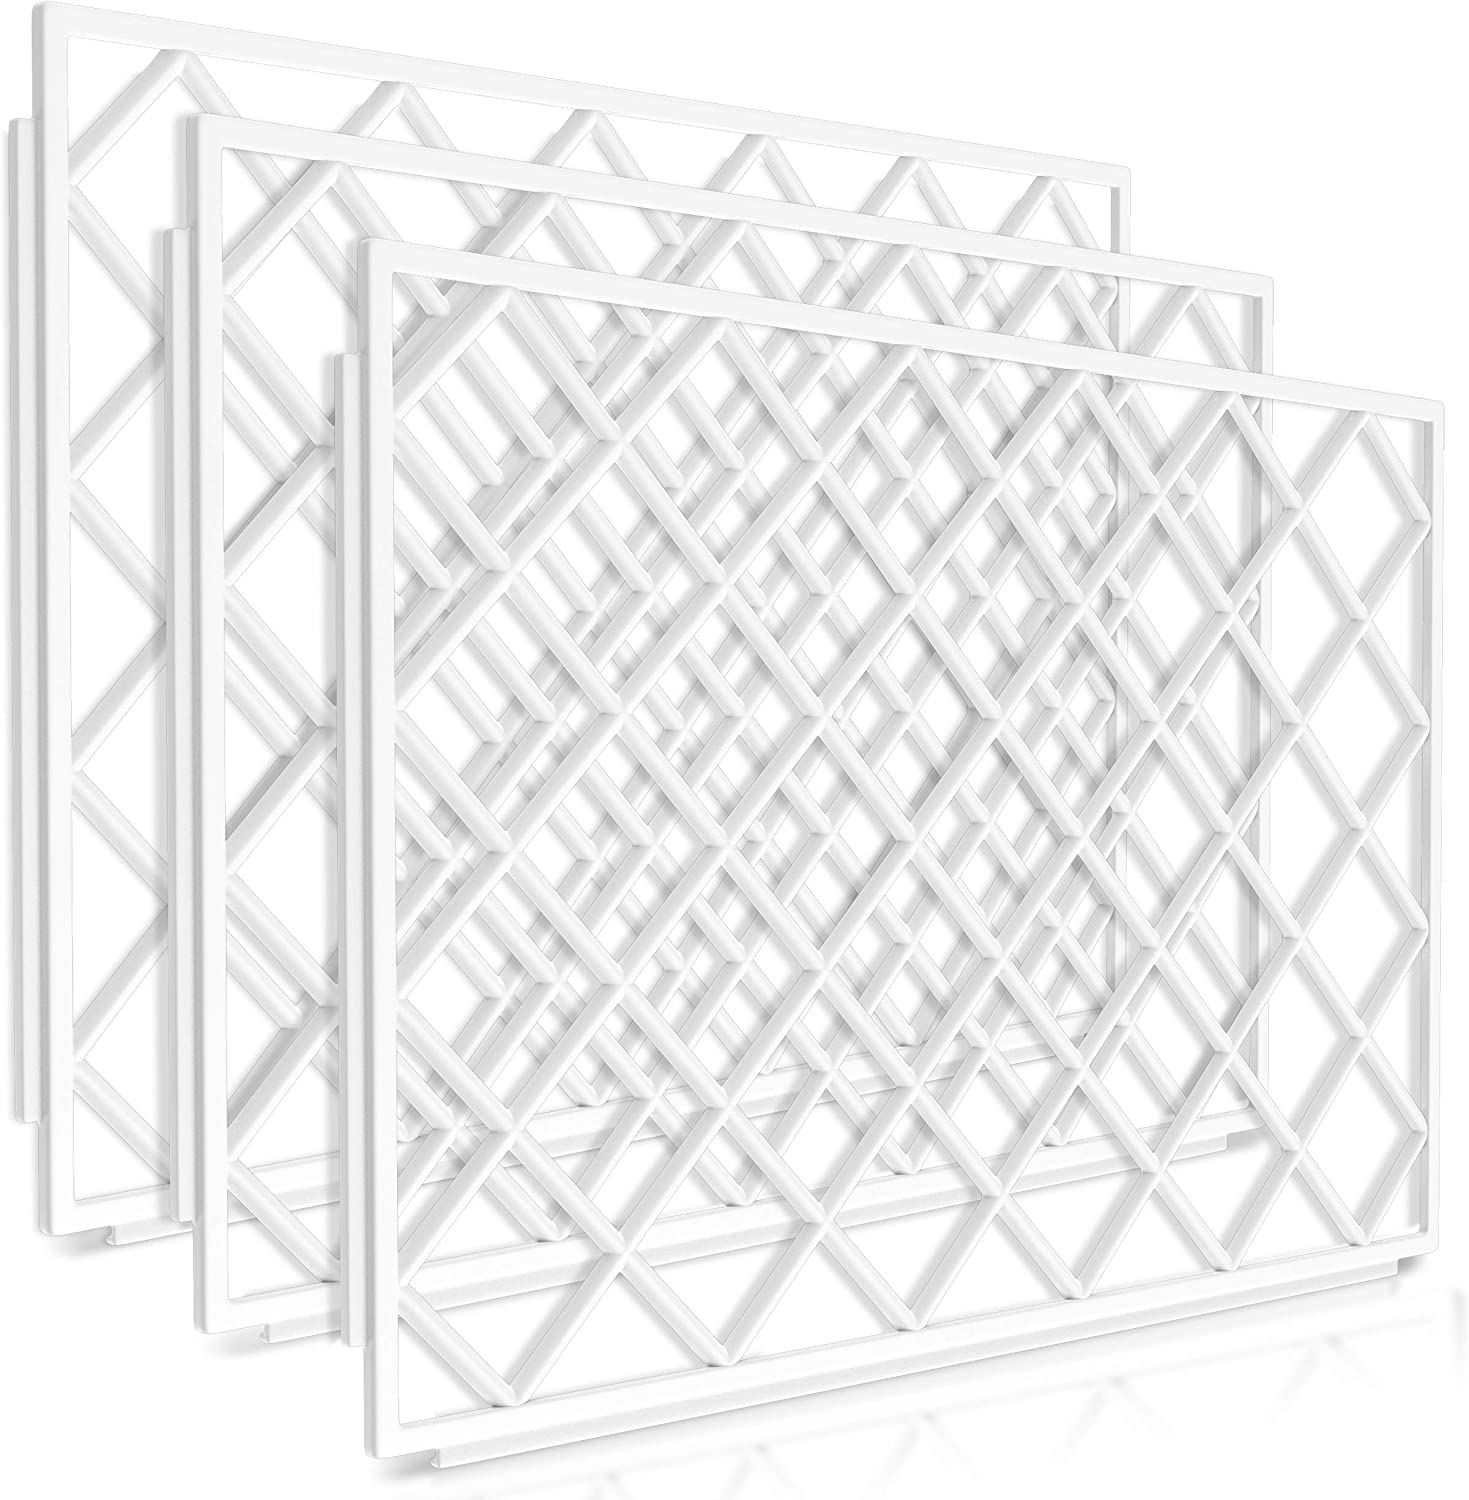 Featured image for “Esatto Bar Products 10 Pieces Interlocking Shelf Mats 8 x 12 Inches, Clear – For Spills, Clean Bars, Stain Protection, and an Anti-slip Surface”